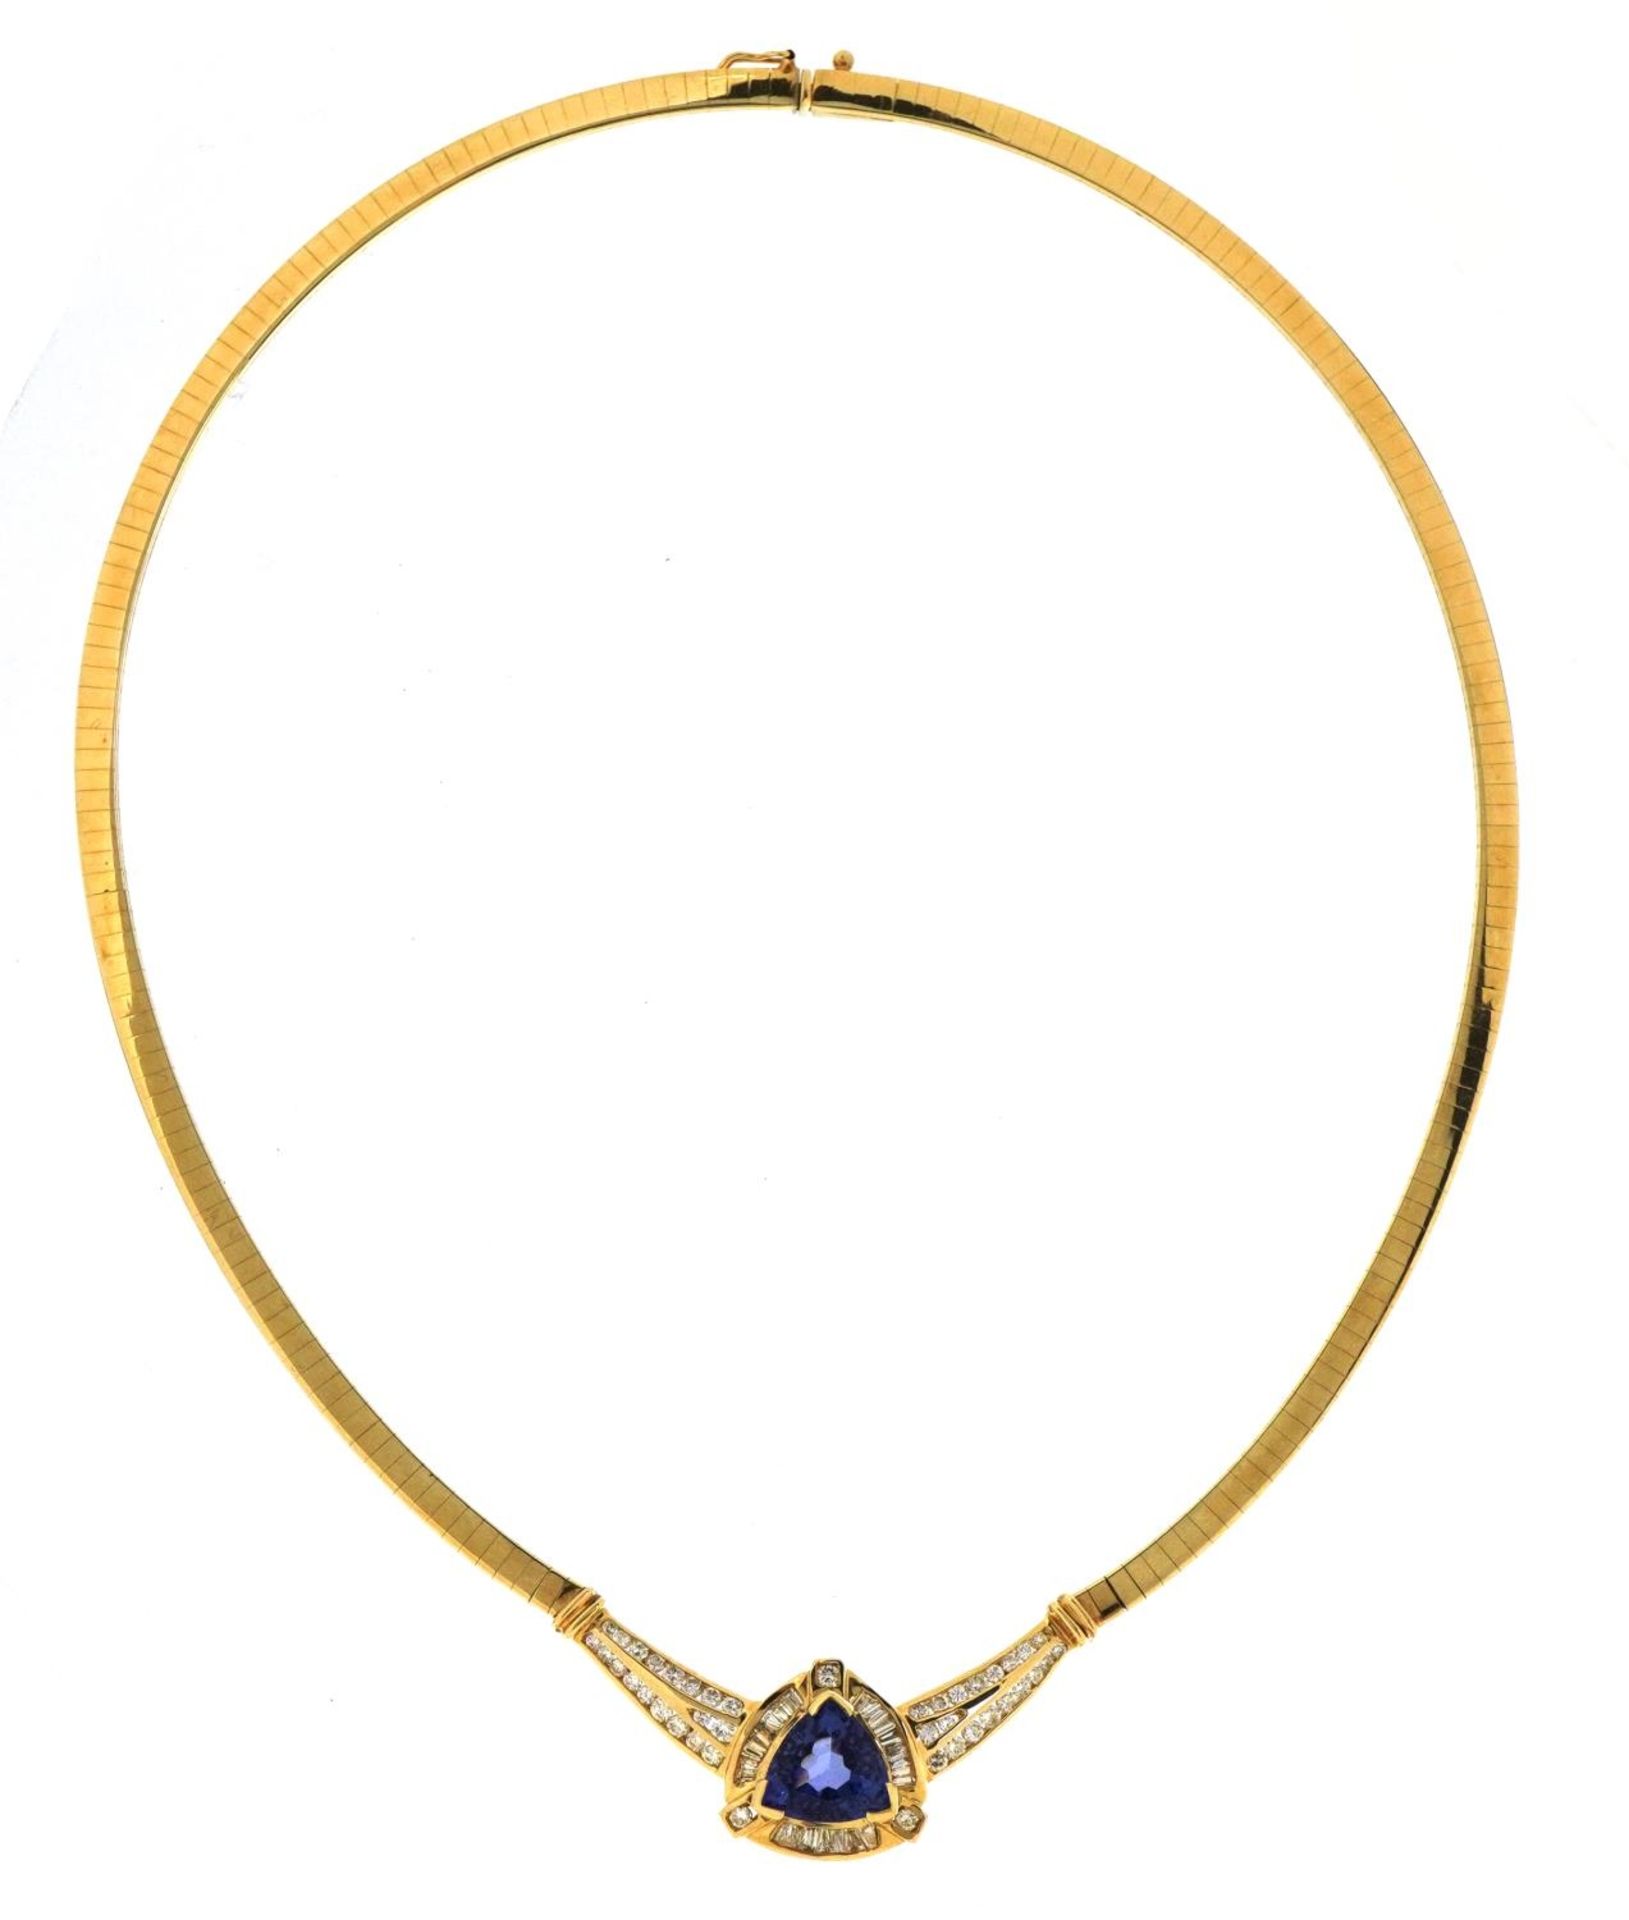 14k gold tanzanite and diamond snake link necklace, the tanzanite approximately 10.5mm x 10.7mm x - Image 2 of 6